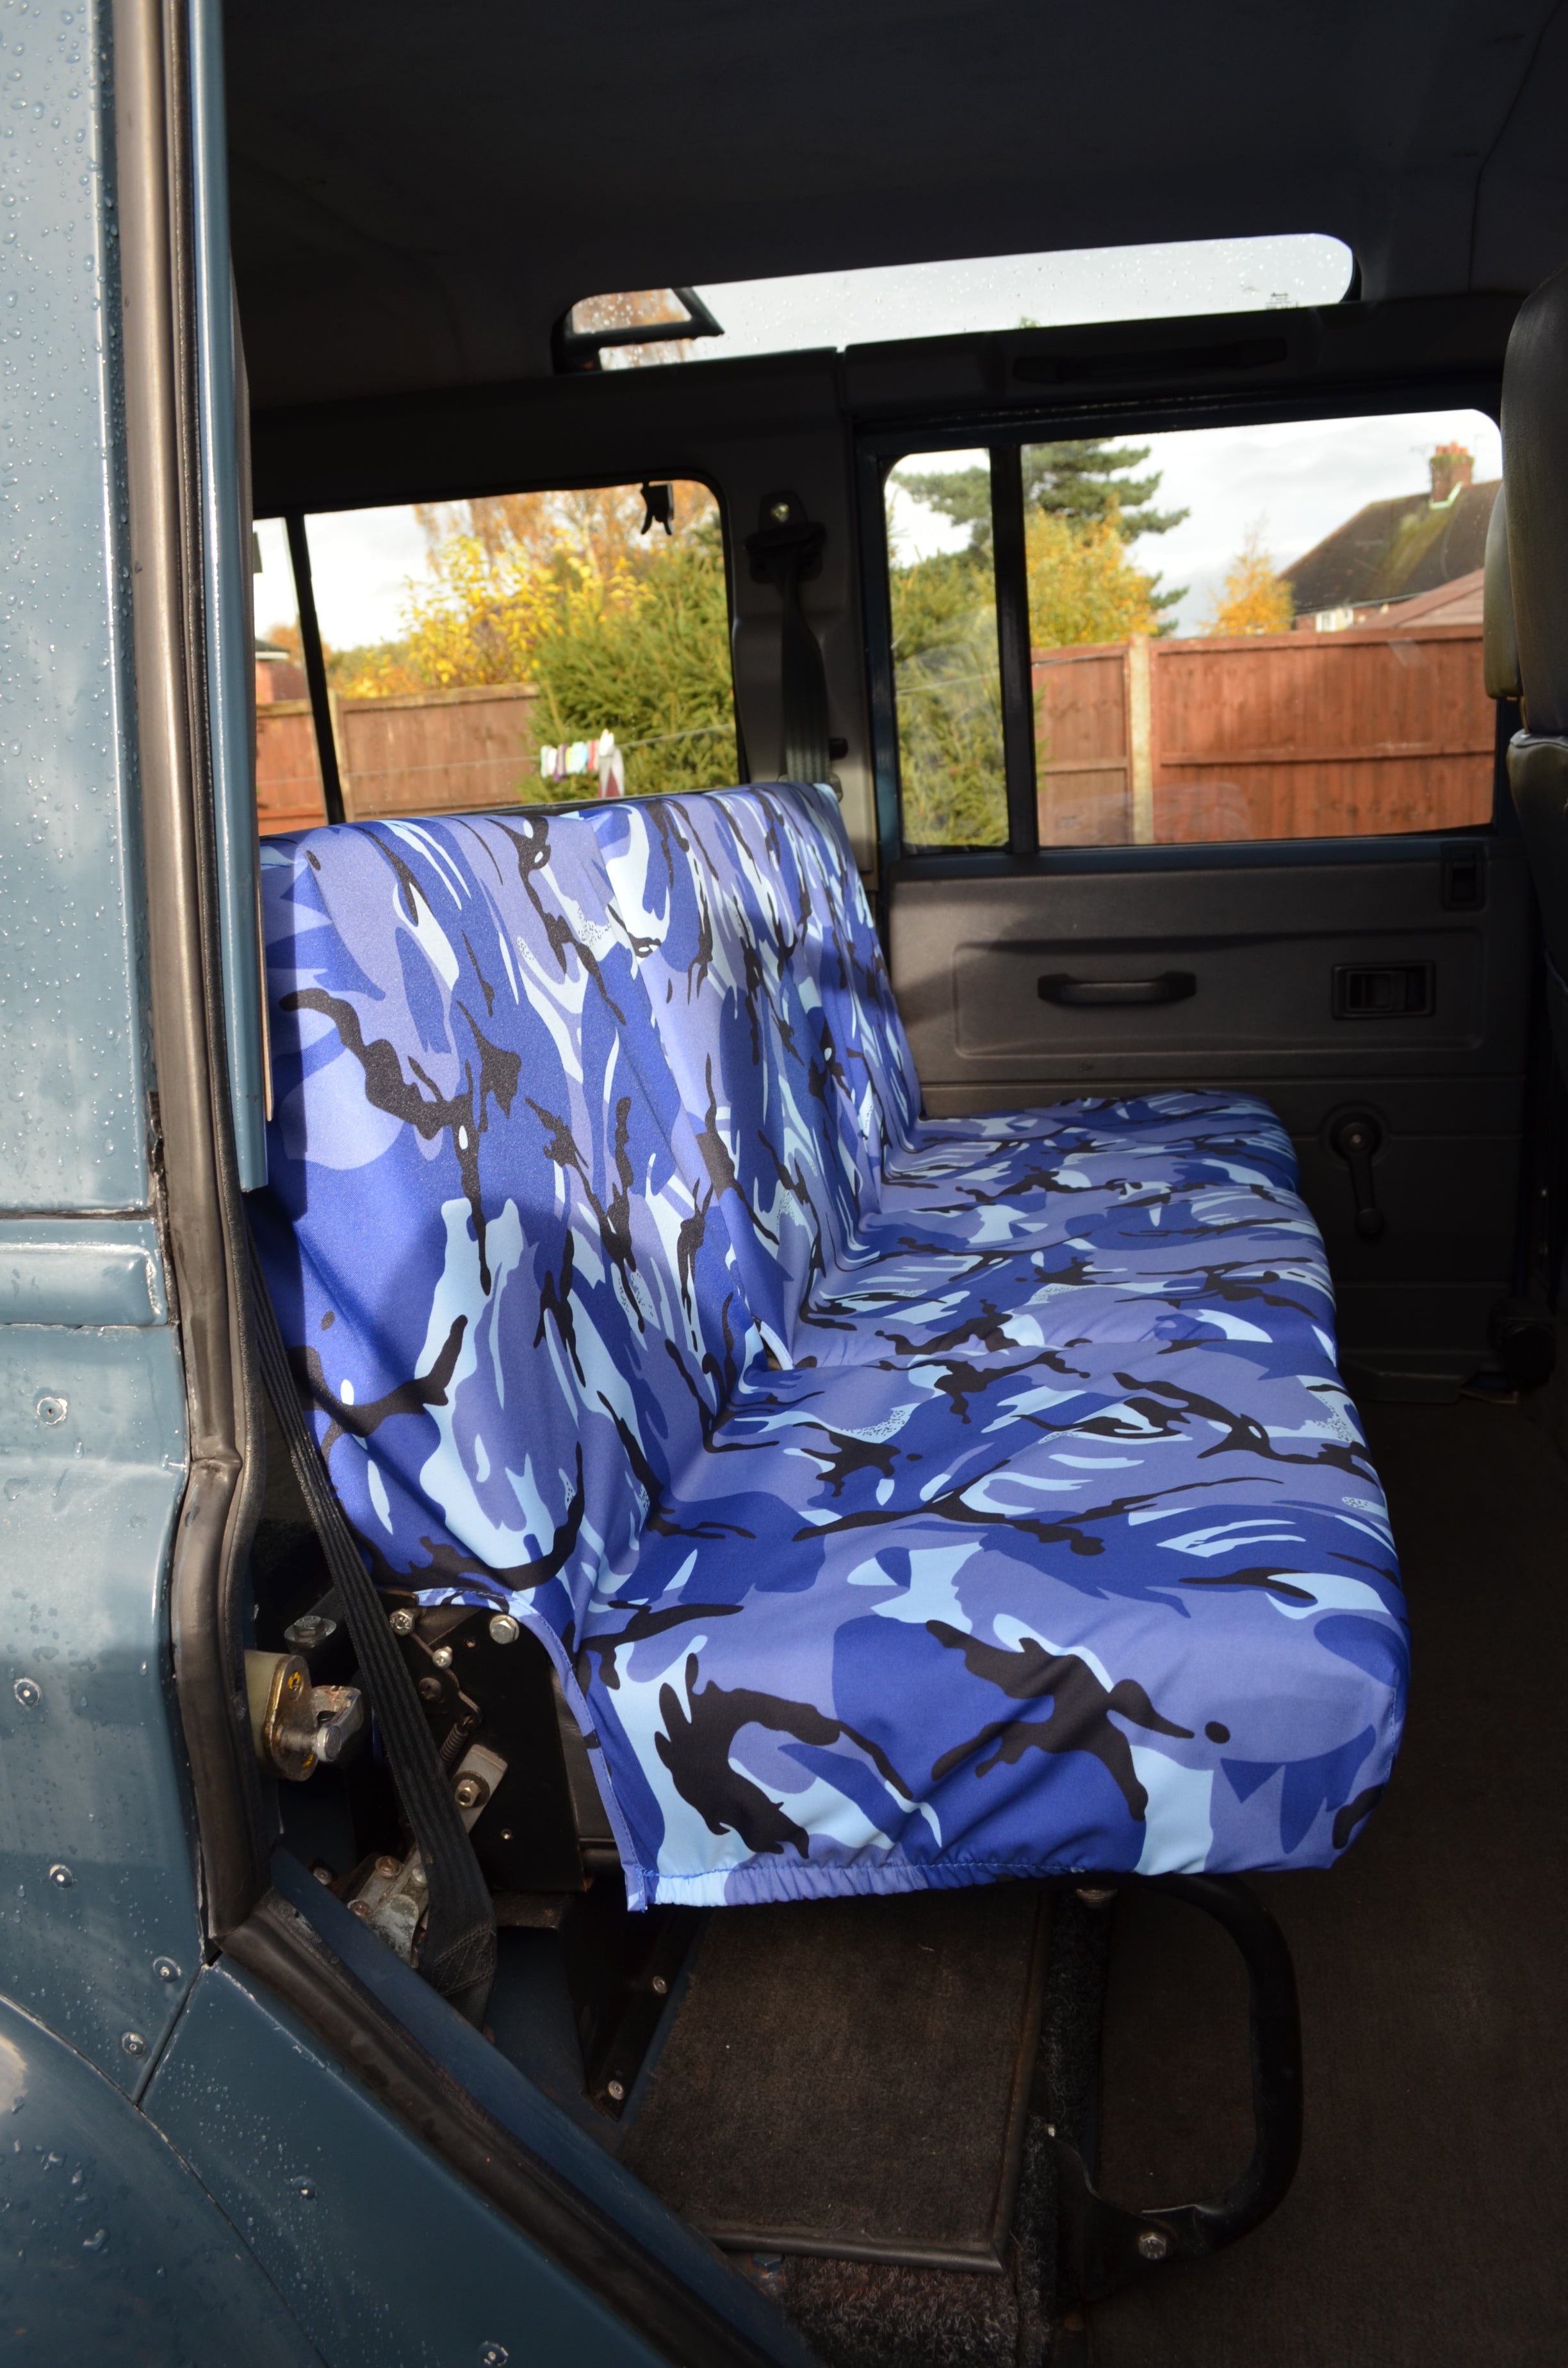 Land Rover Defender 1983 - 2007 Rear Seat Covers 2nd Row 3 Singles / Blue Camouflage Turtle Covers Ltd